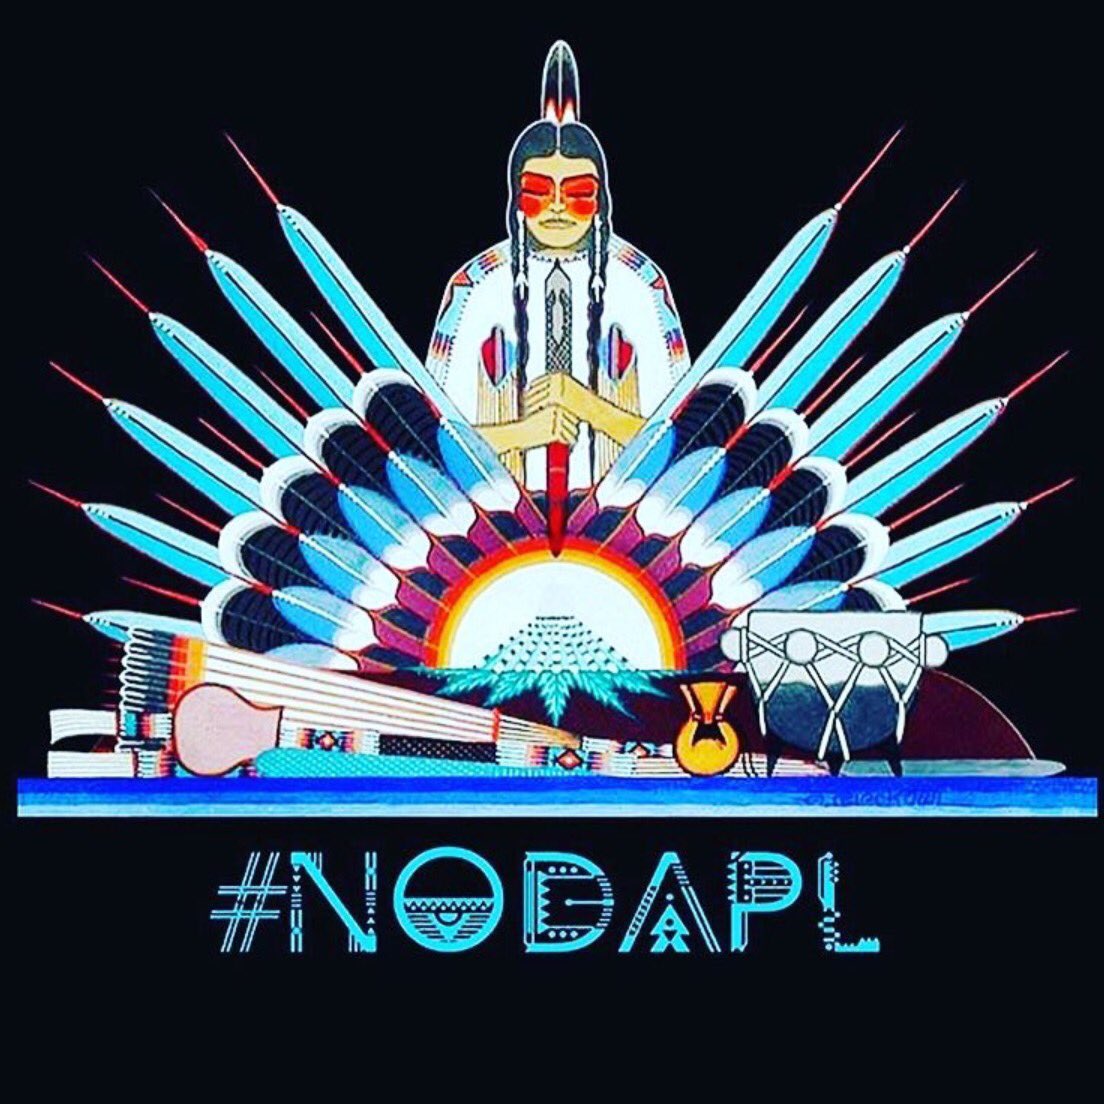 i stand with standing rock. take a stand. #waterislife #NoDAPL #protectthesacred https://t.co/9ZuQSM2ult https://t.co/TZt2NYmHGk